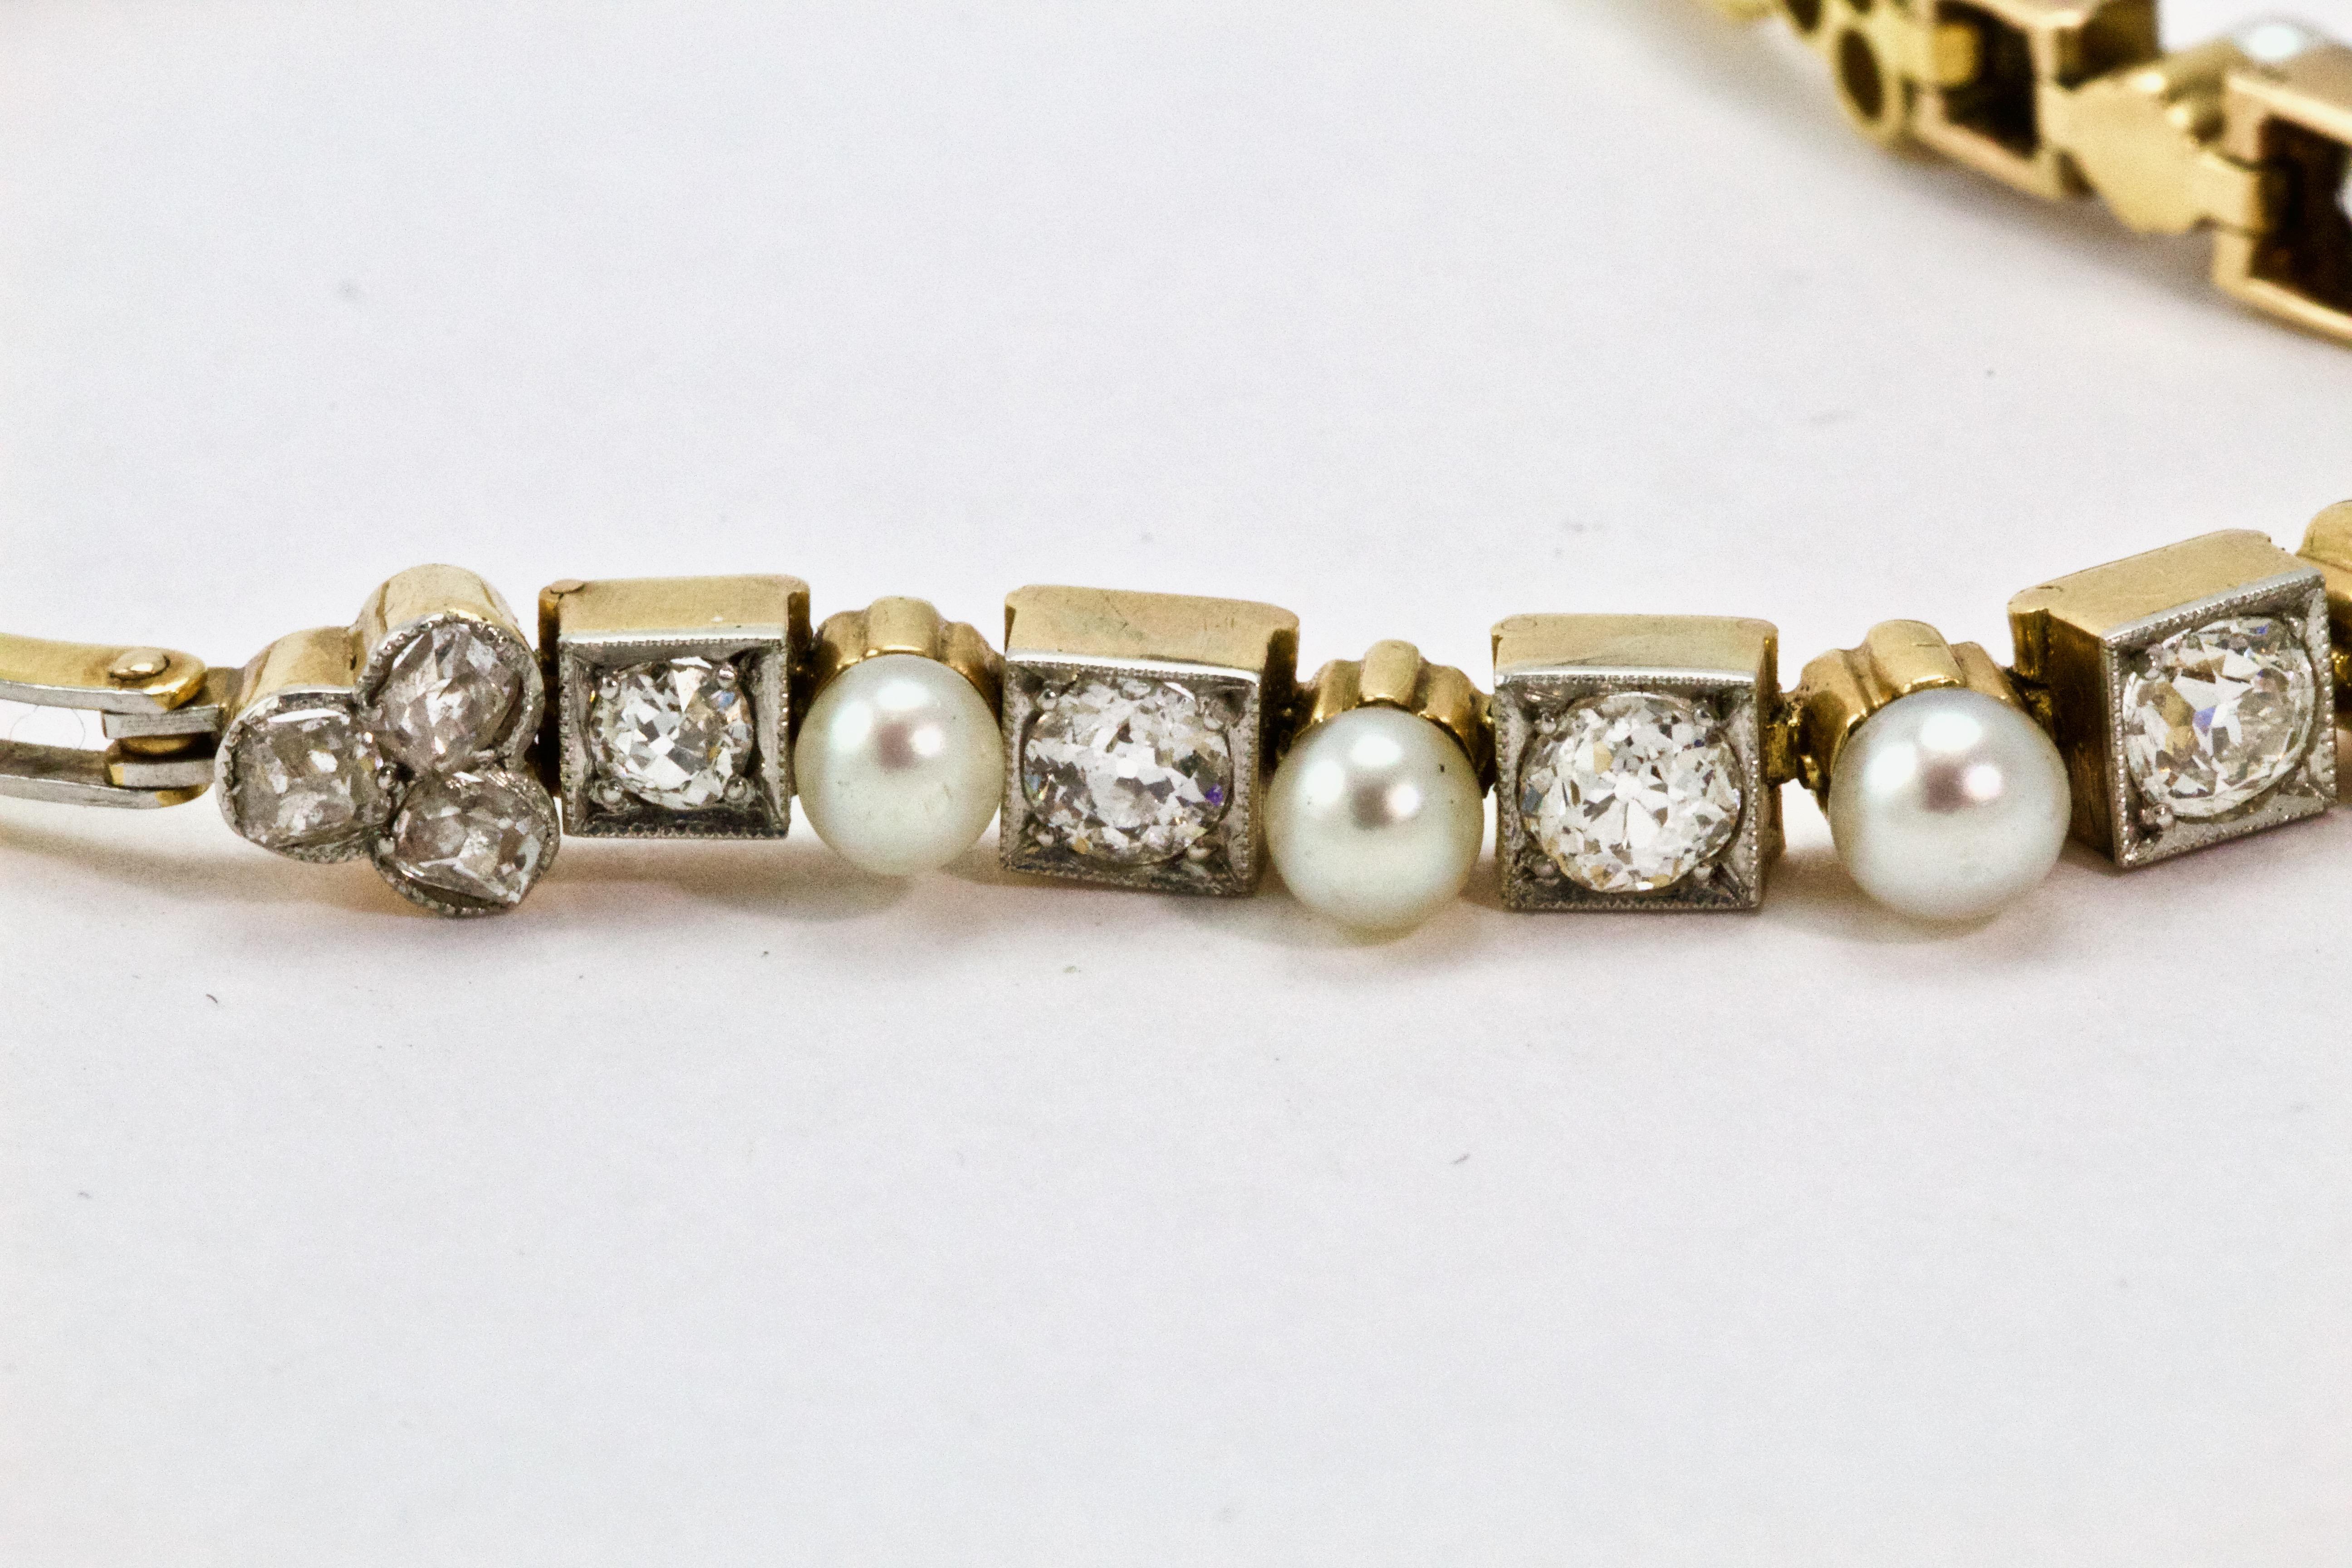 This stunning Edwardian bracelet features eight graduated old European cut diamonds alternated with seven natural pearls and a tefoil of rose cut diamonds to either end. The bracelet is modeled in 18k yellow gold, whilst each diamond sits in a